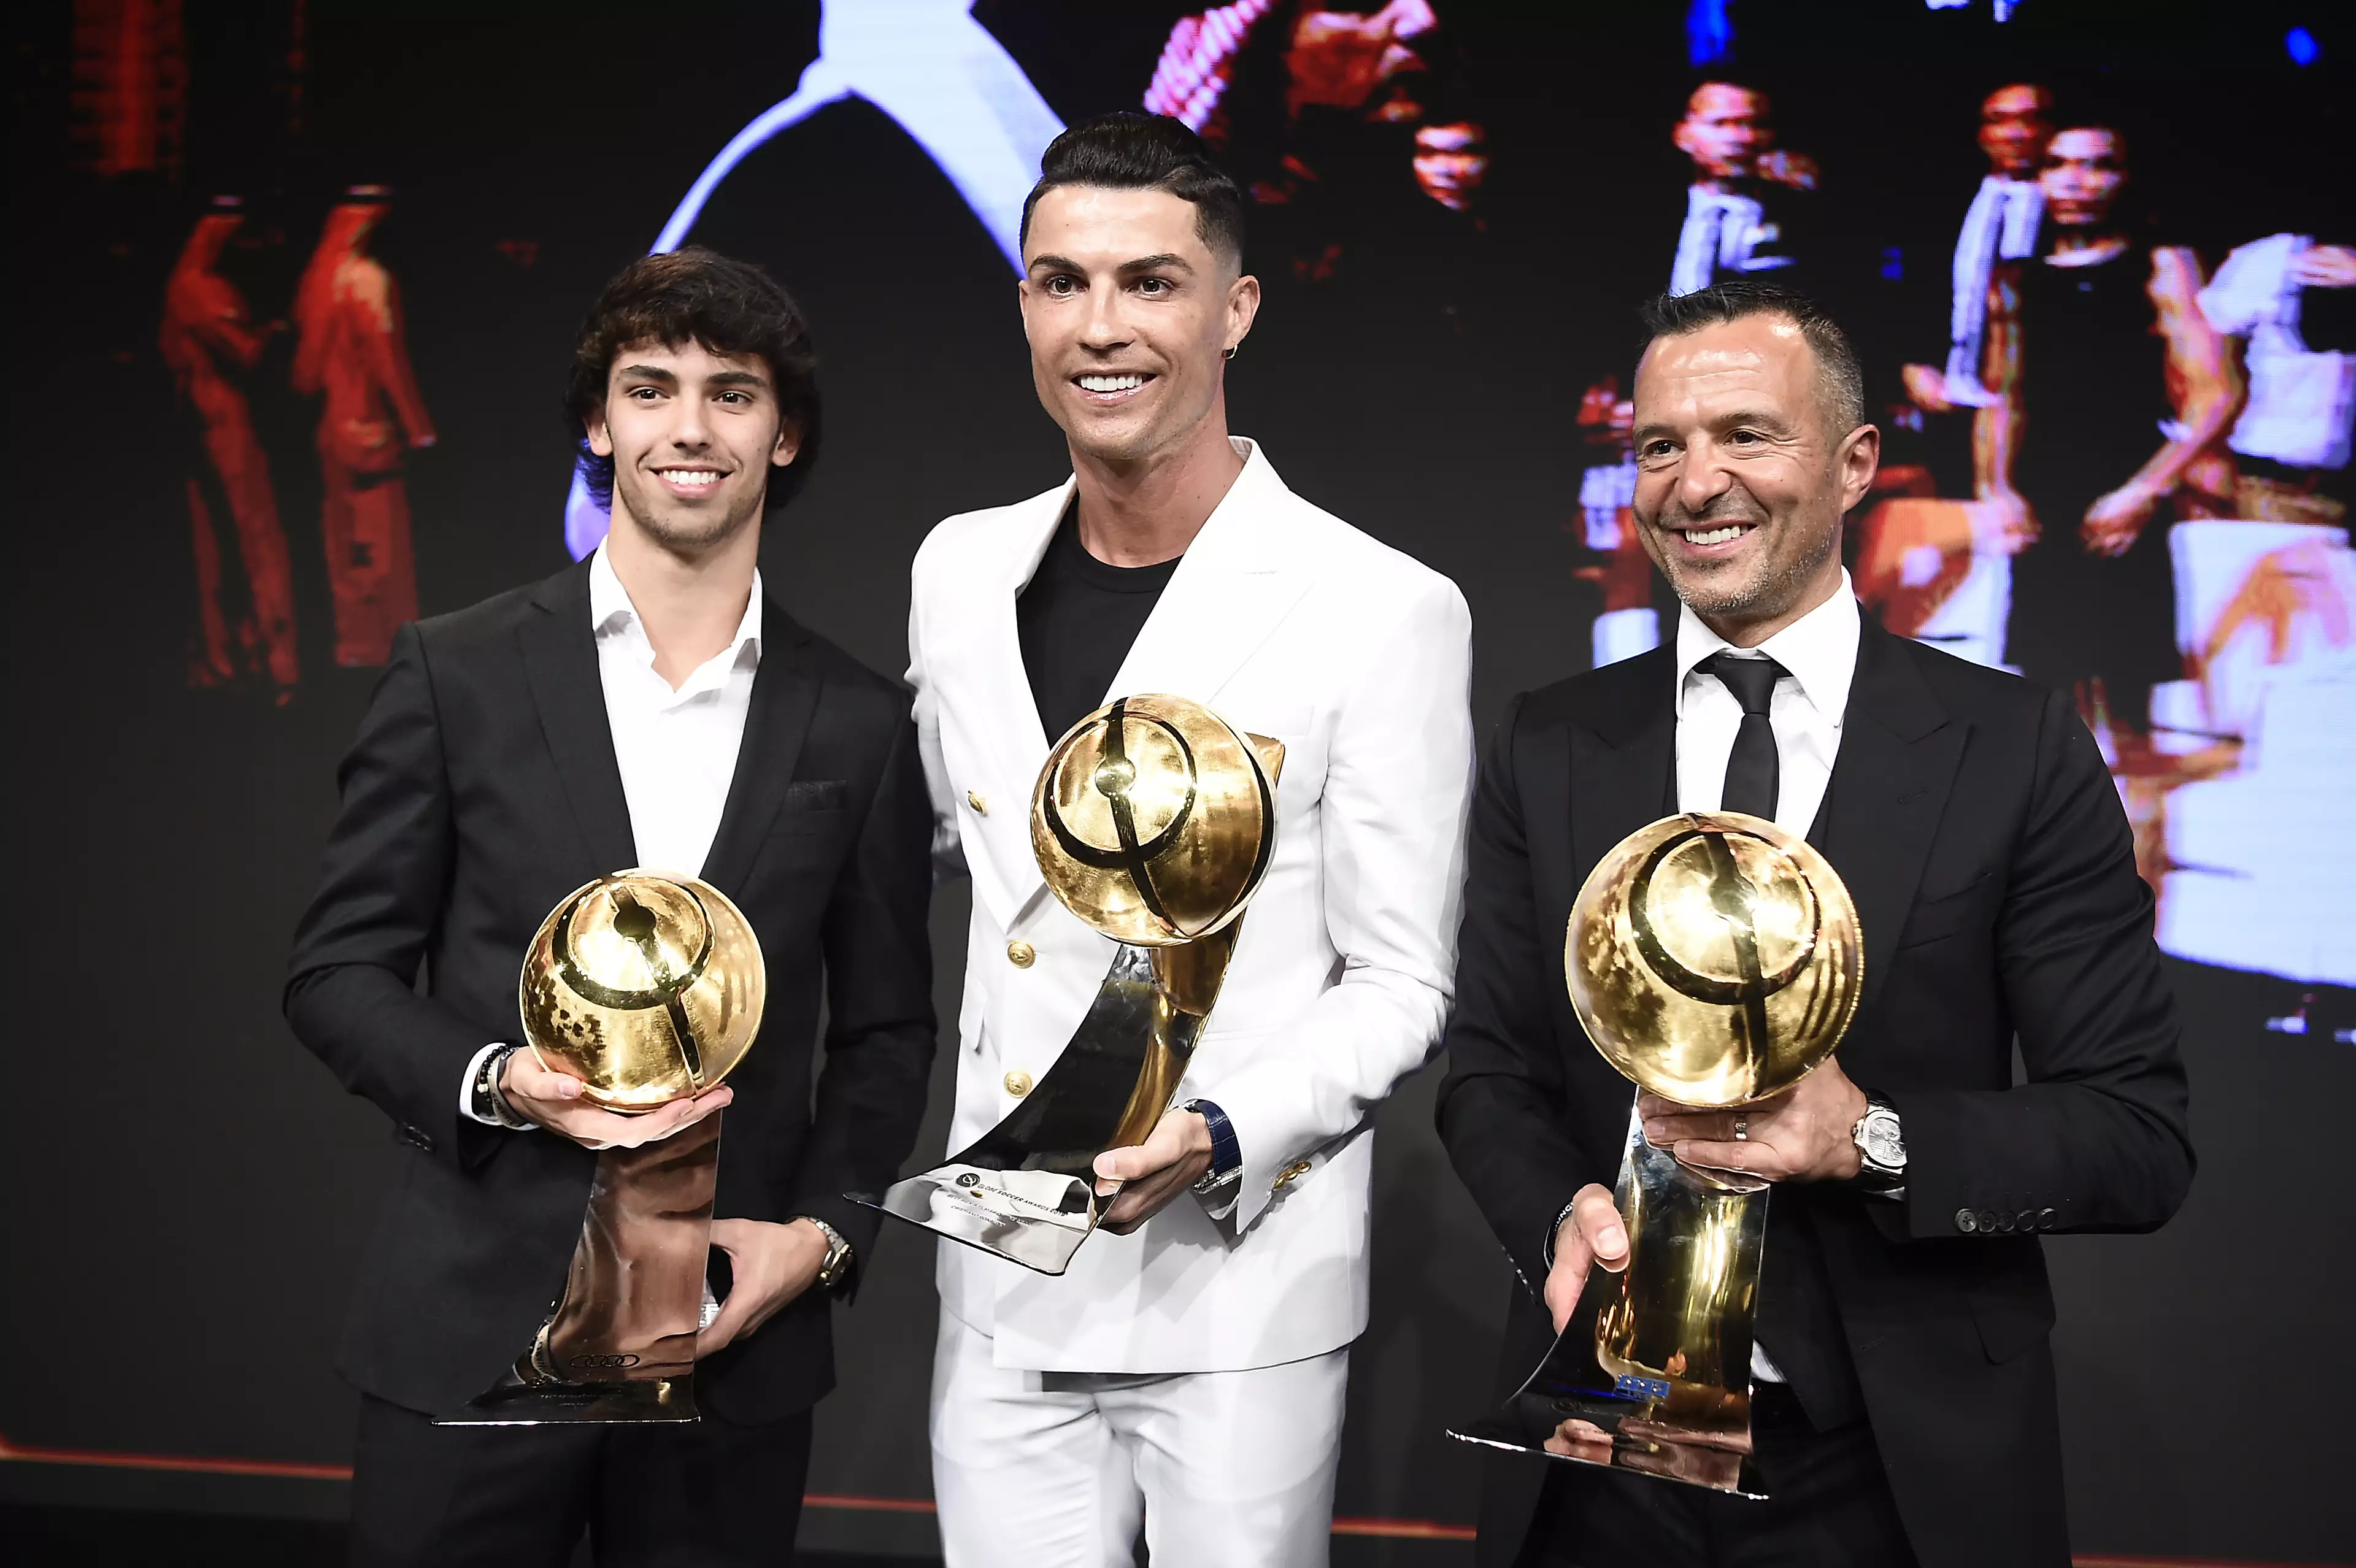 Jorge Mendes with future Wolves signings Cristiano Ronaldo and Joao Felix. Image: PA Images